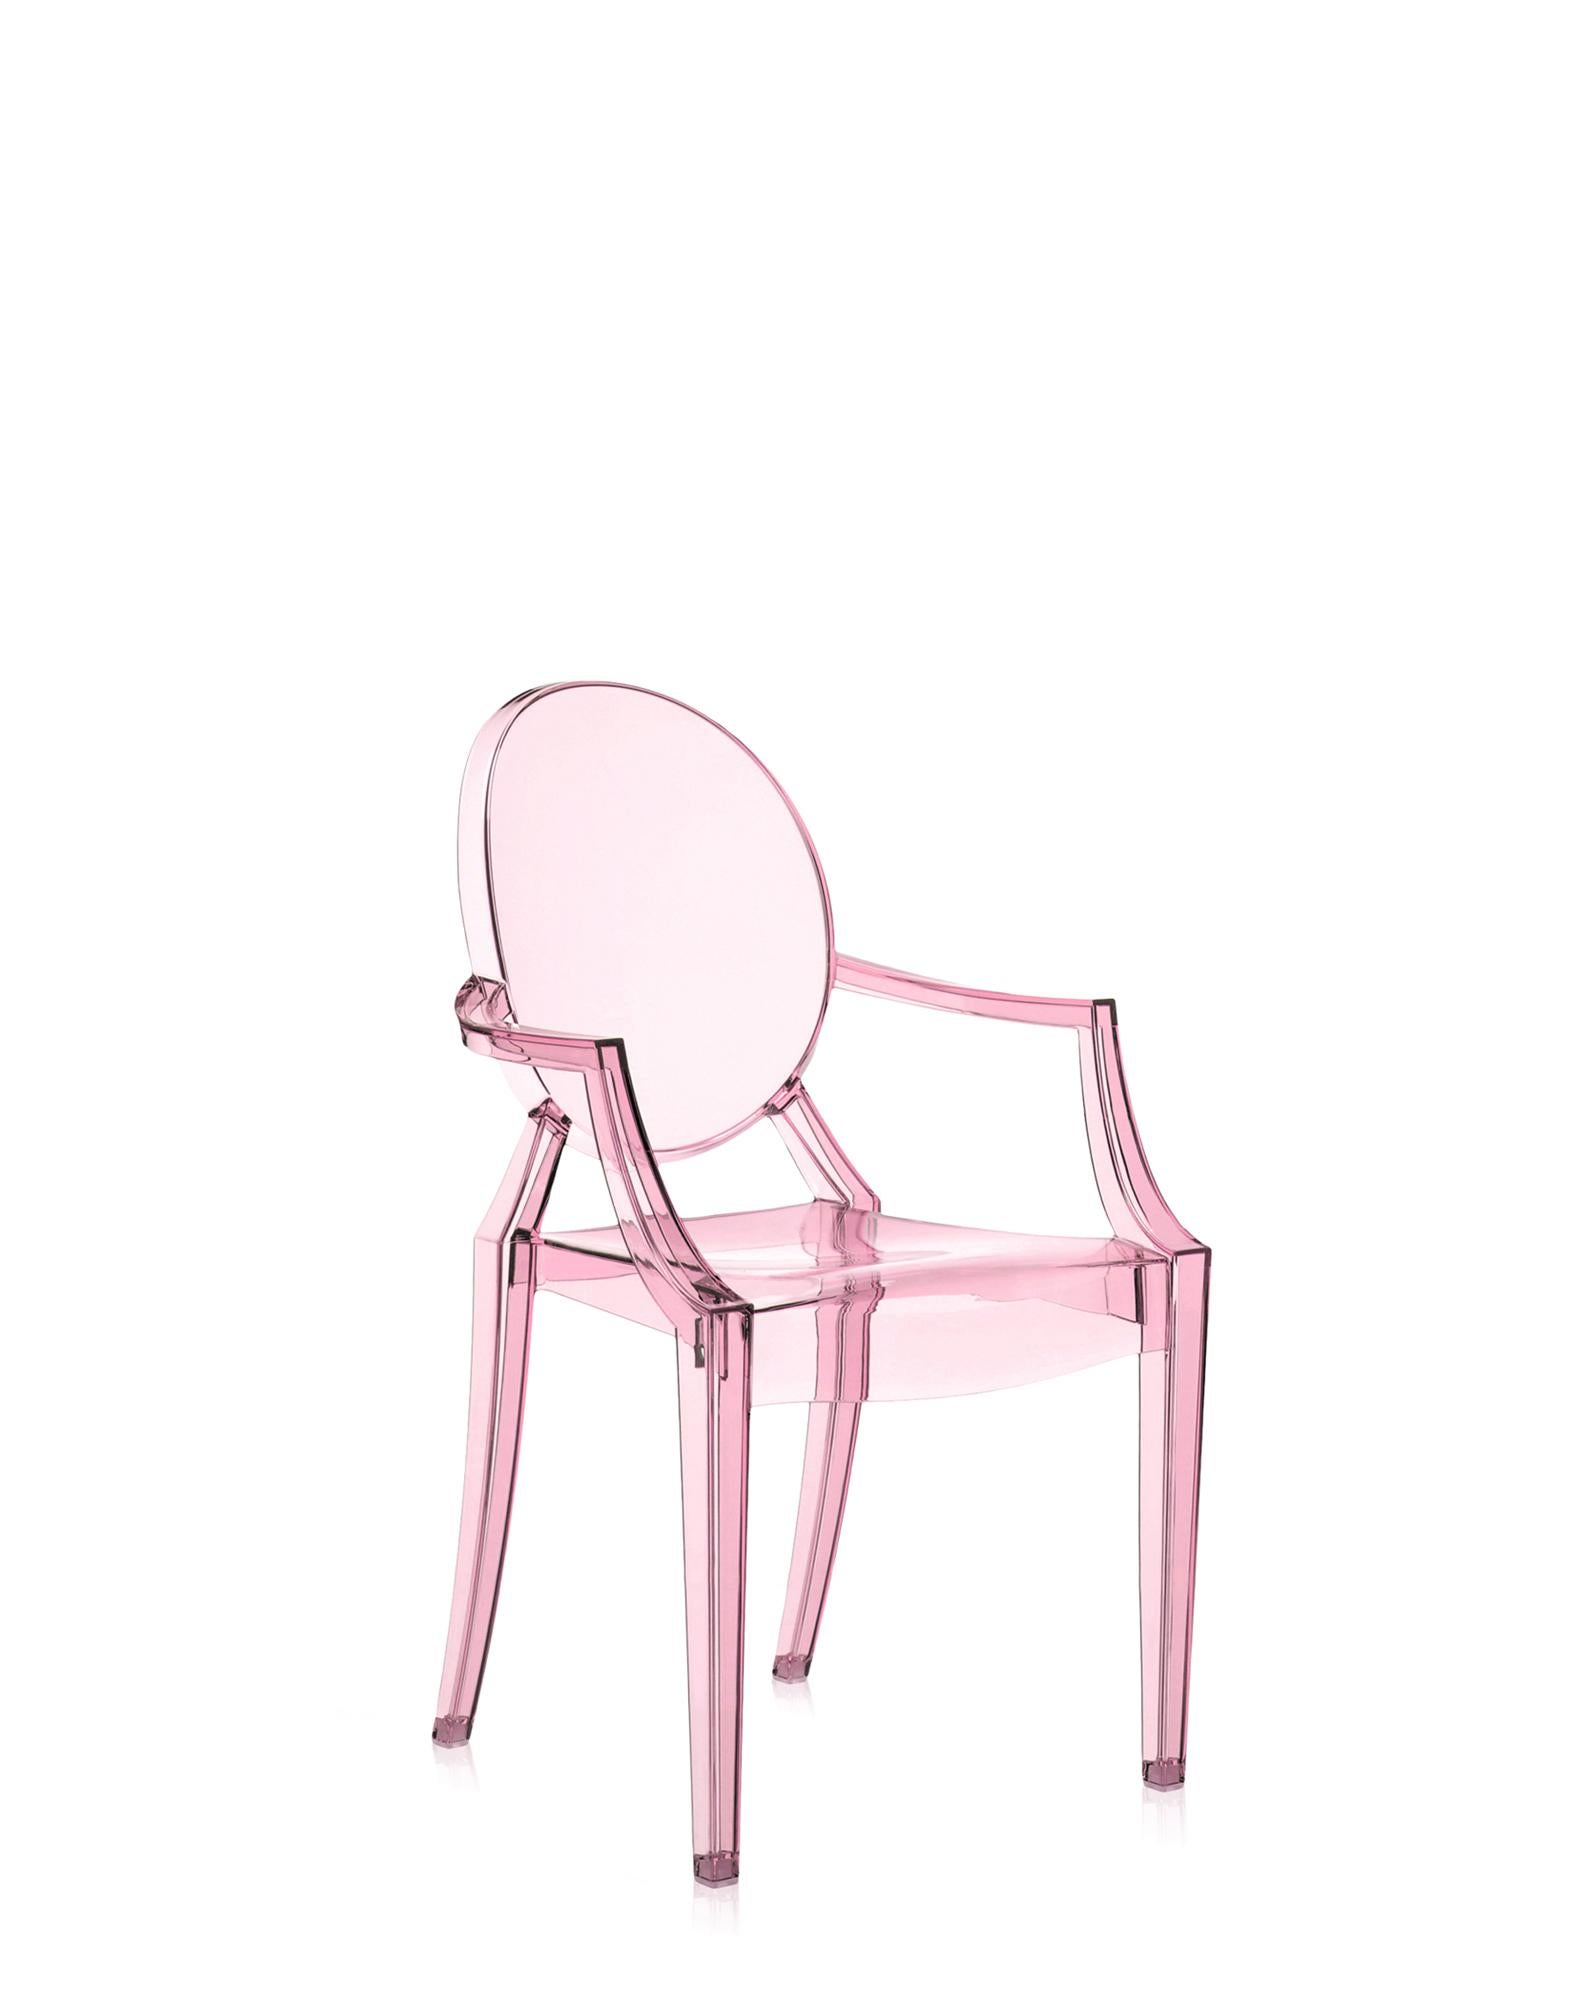 The miniature version of one of the most famous design chairs joins the Kartell Kids line in several new versions. Philippe Starck's Lou Lou Ghost gets new and customisable graphics for the fun world of kids.

Dimensions: height: 24.75 in.;